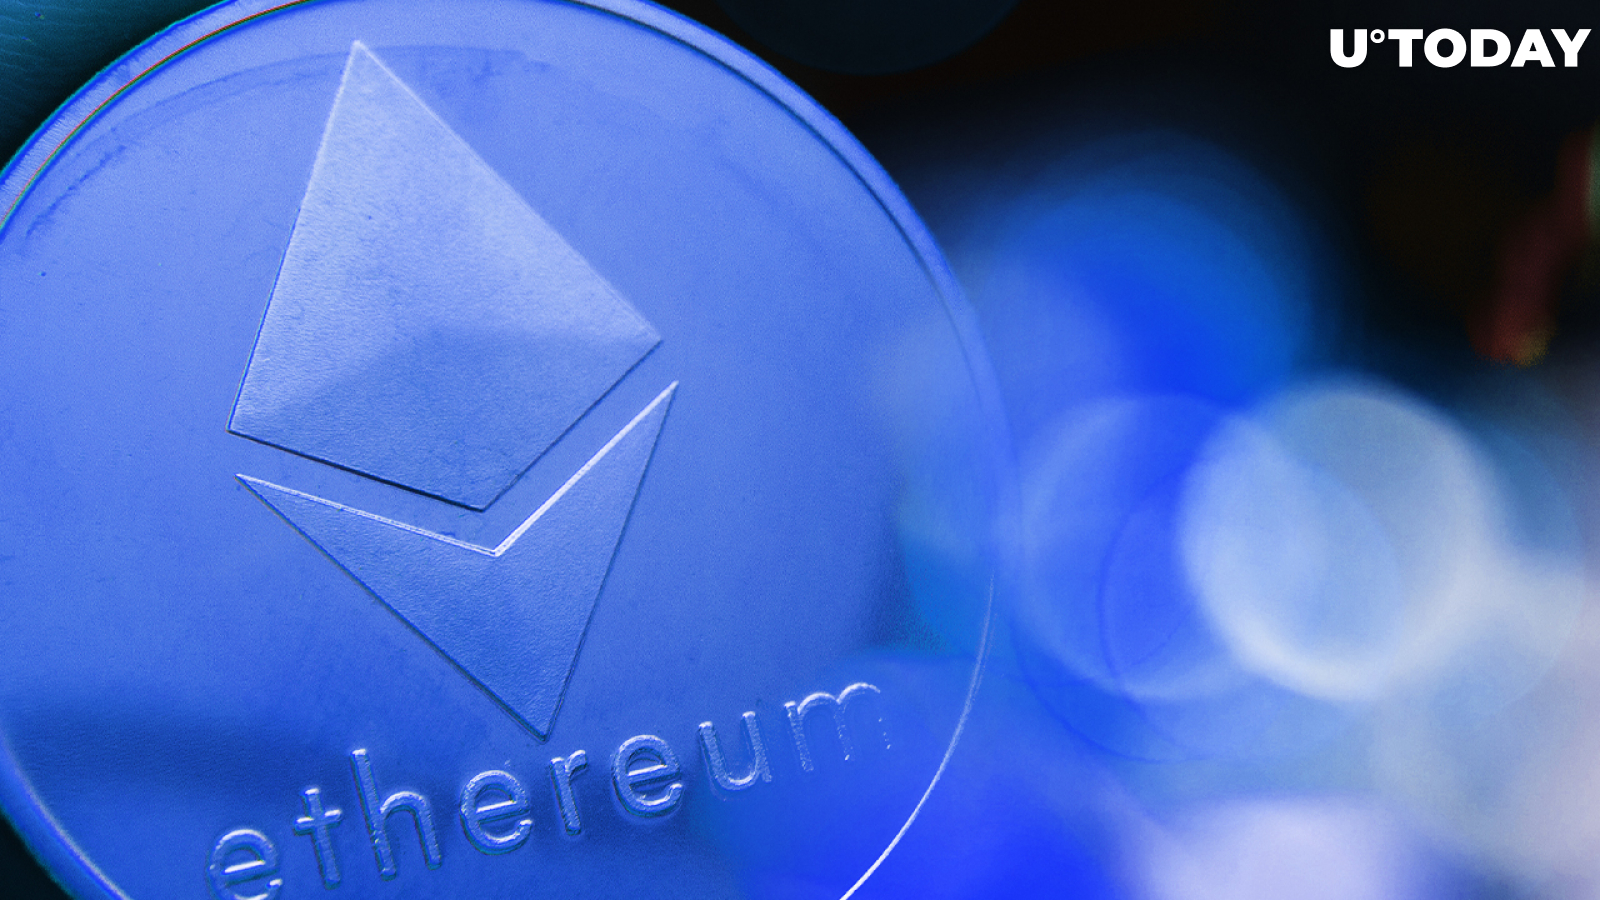 Ethereum Has One Obstacle to Fresh Highs, According to On-Chain Data